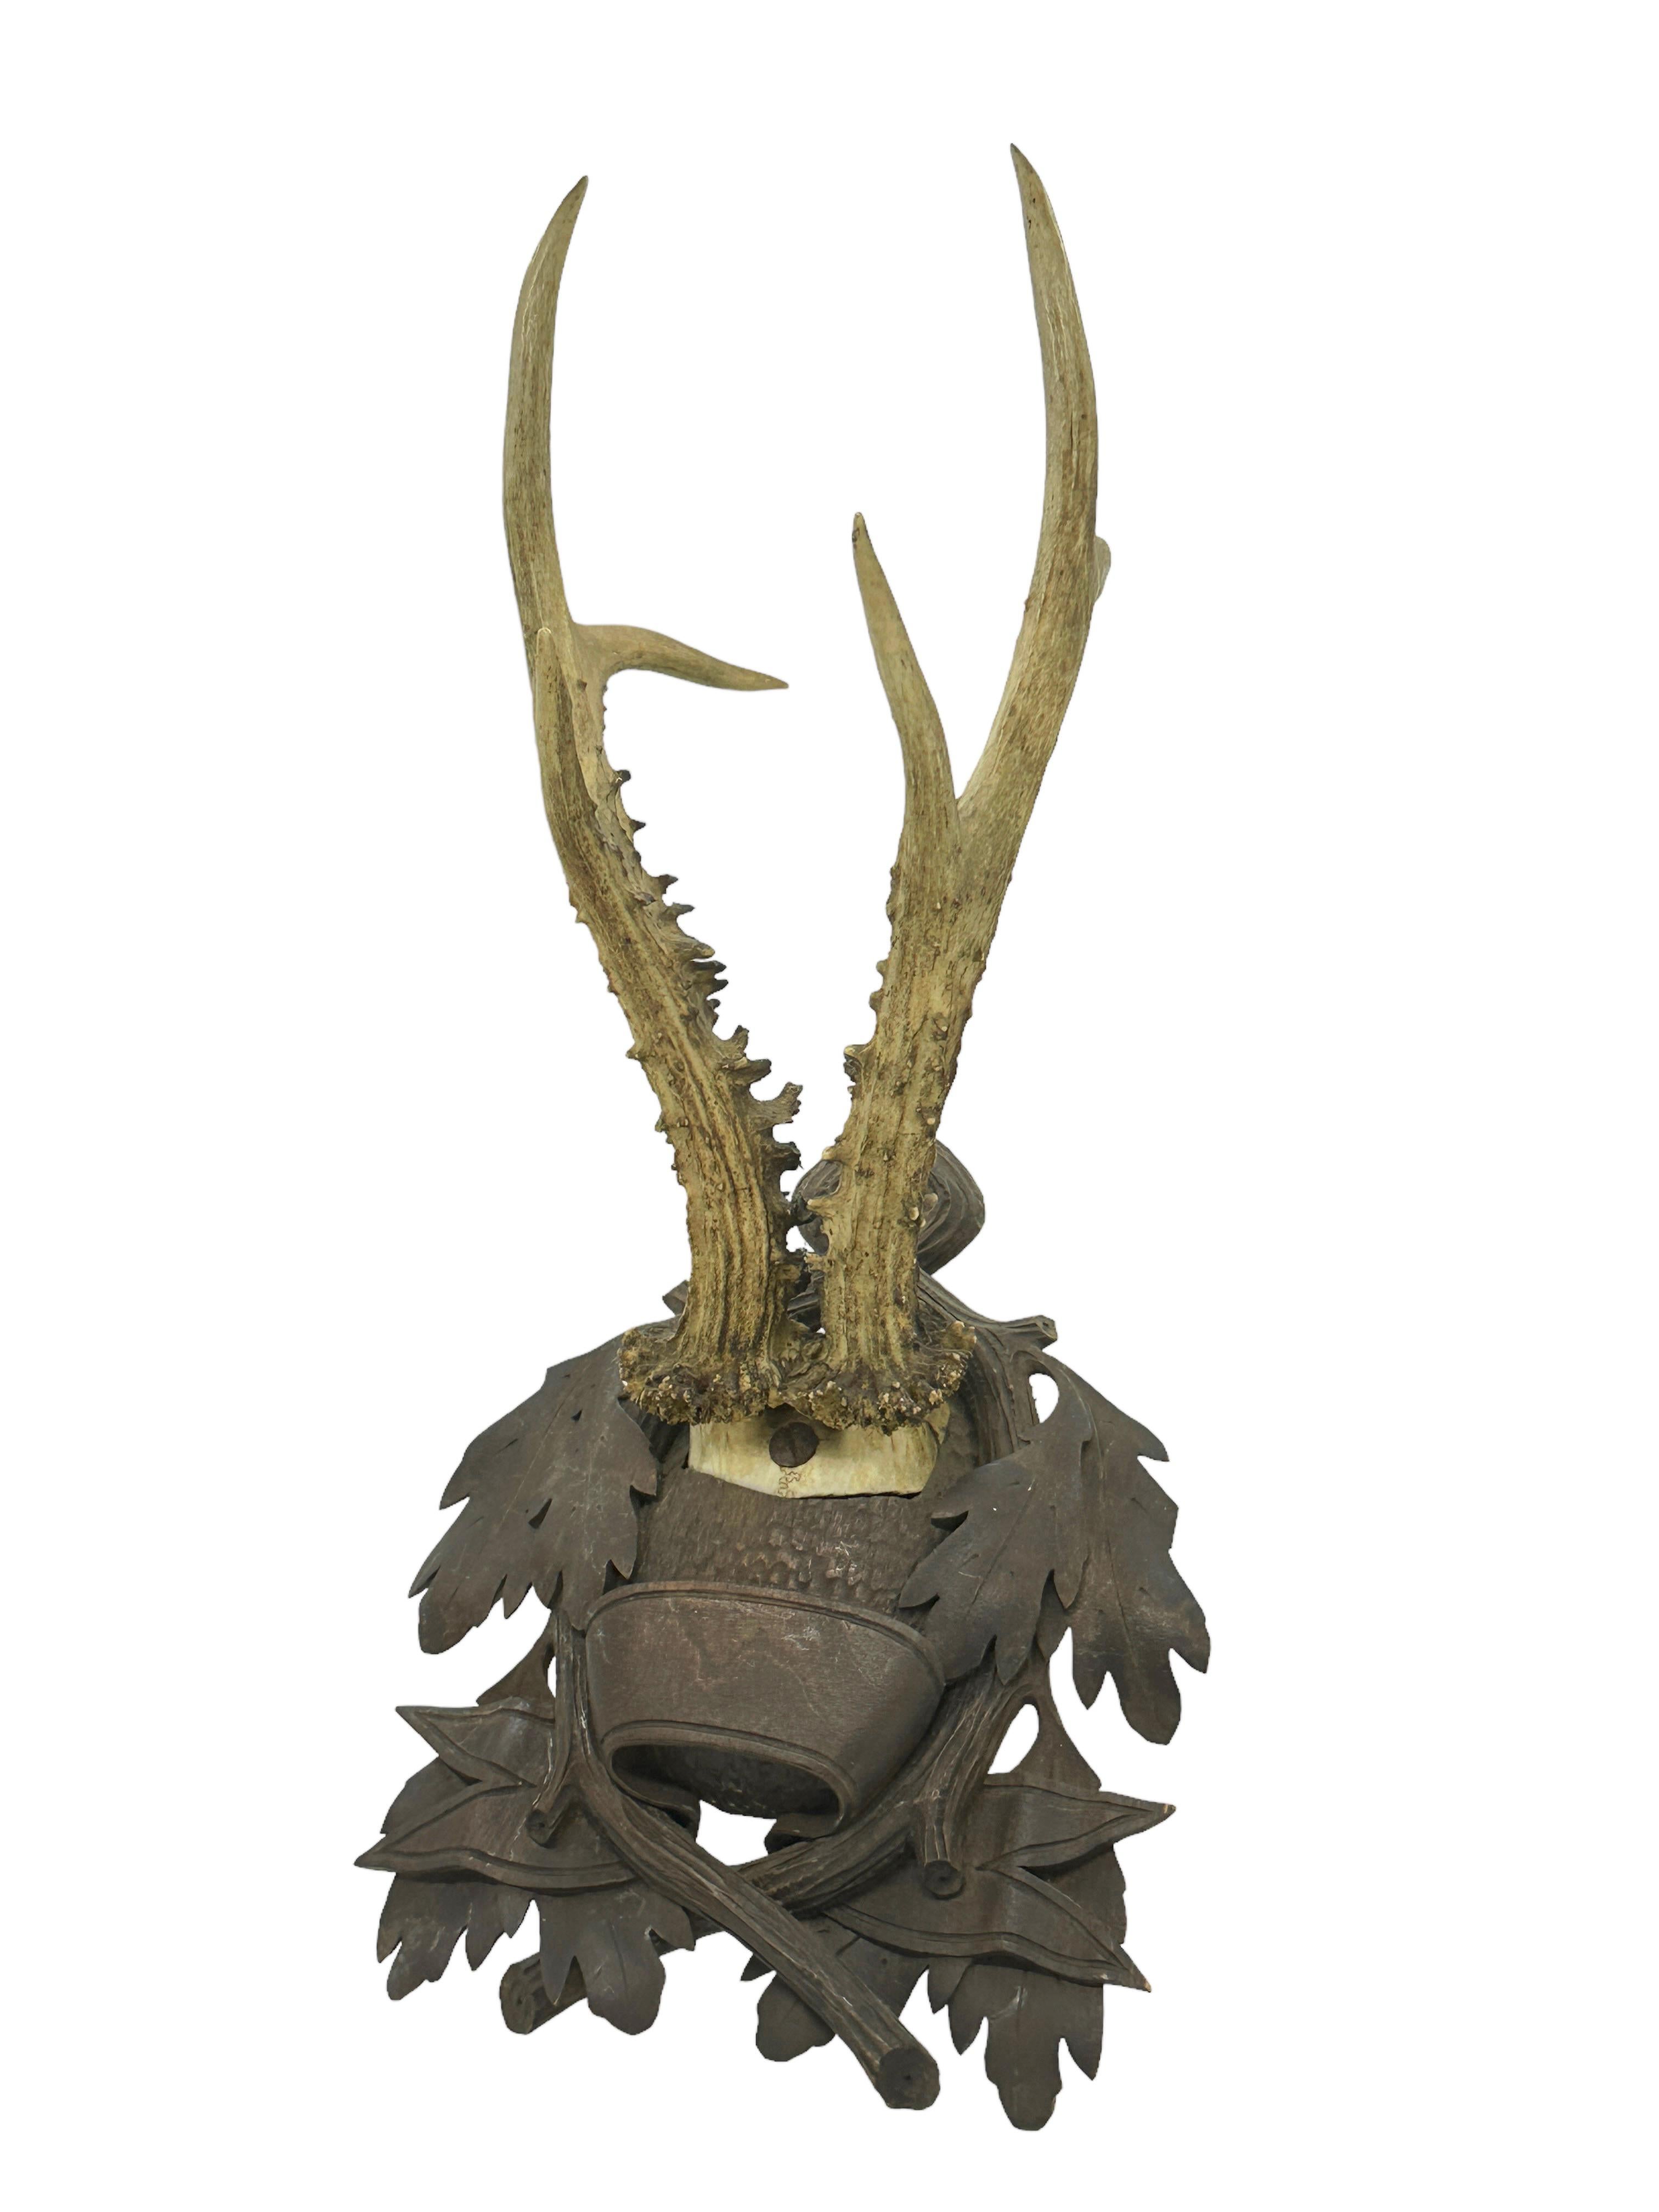 An antique Black Forest deer antler trophy on hand carved, Black Forest wooden plaque. We beliefe its from the Late 19th Century. A nice addition to your hunters loge, cabin, man cave or just to display them in your house. Found at an Estate Sale in